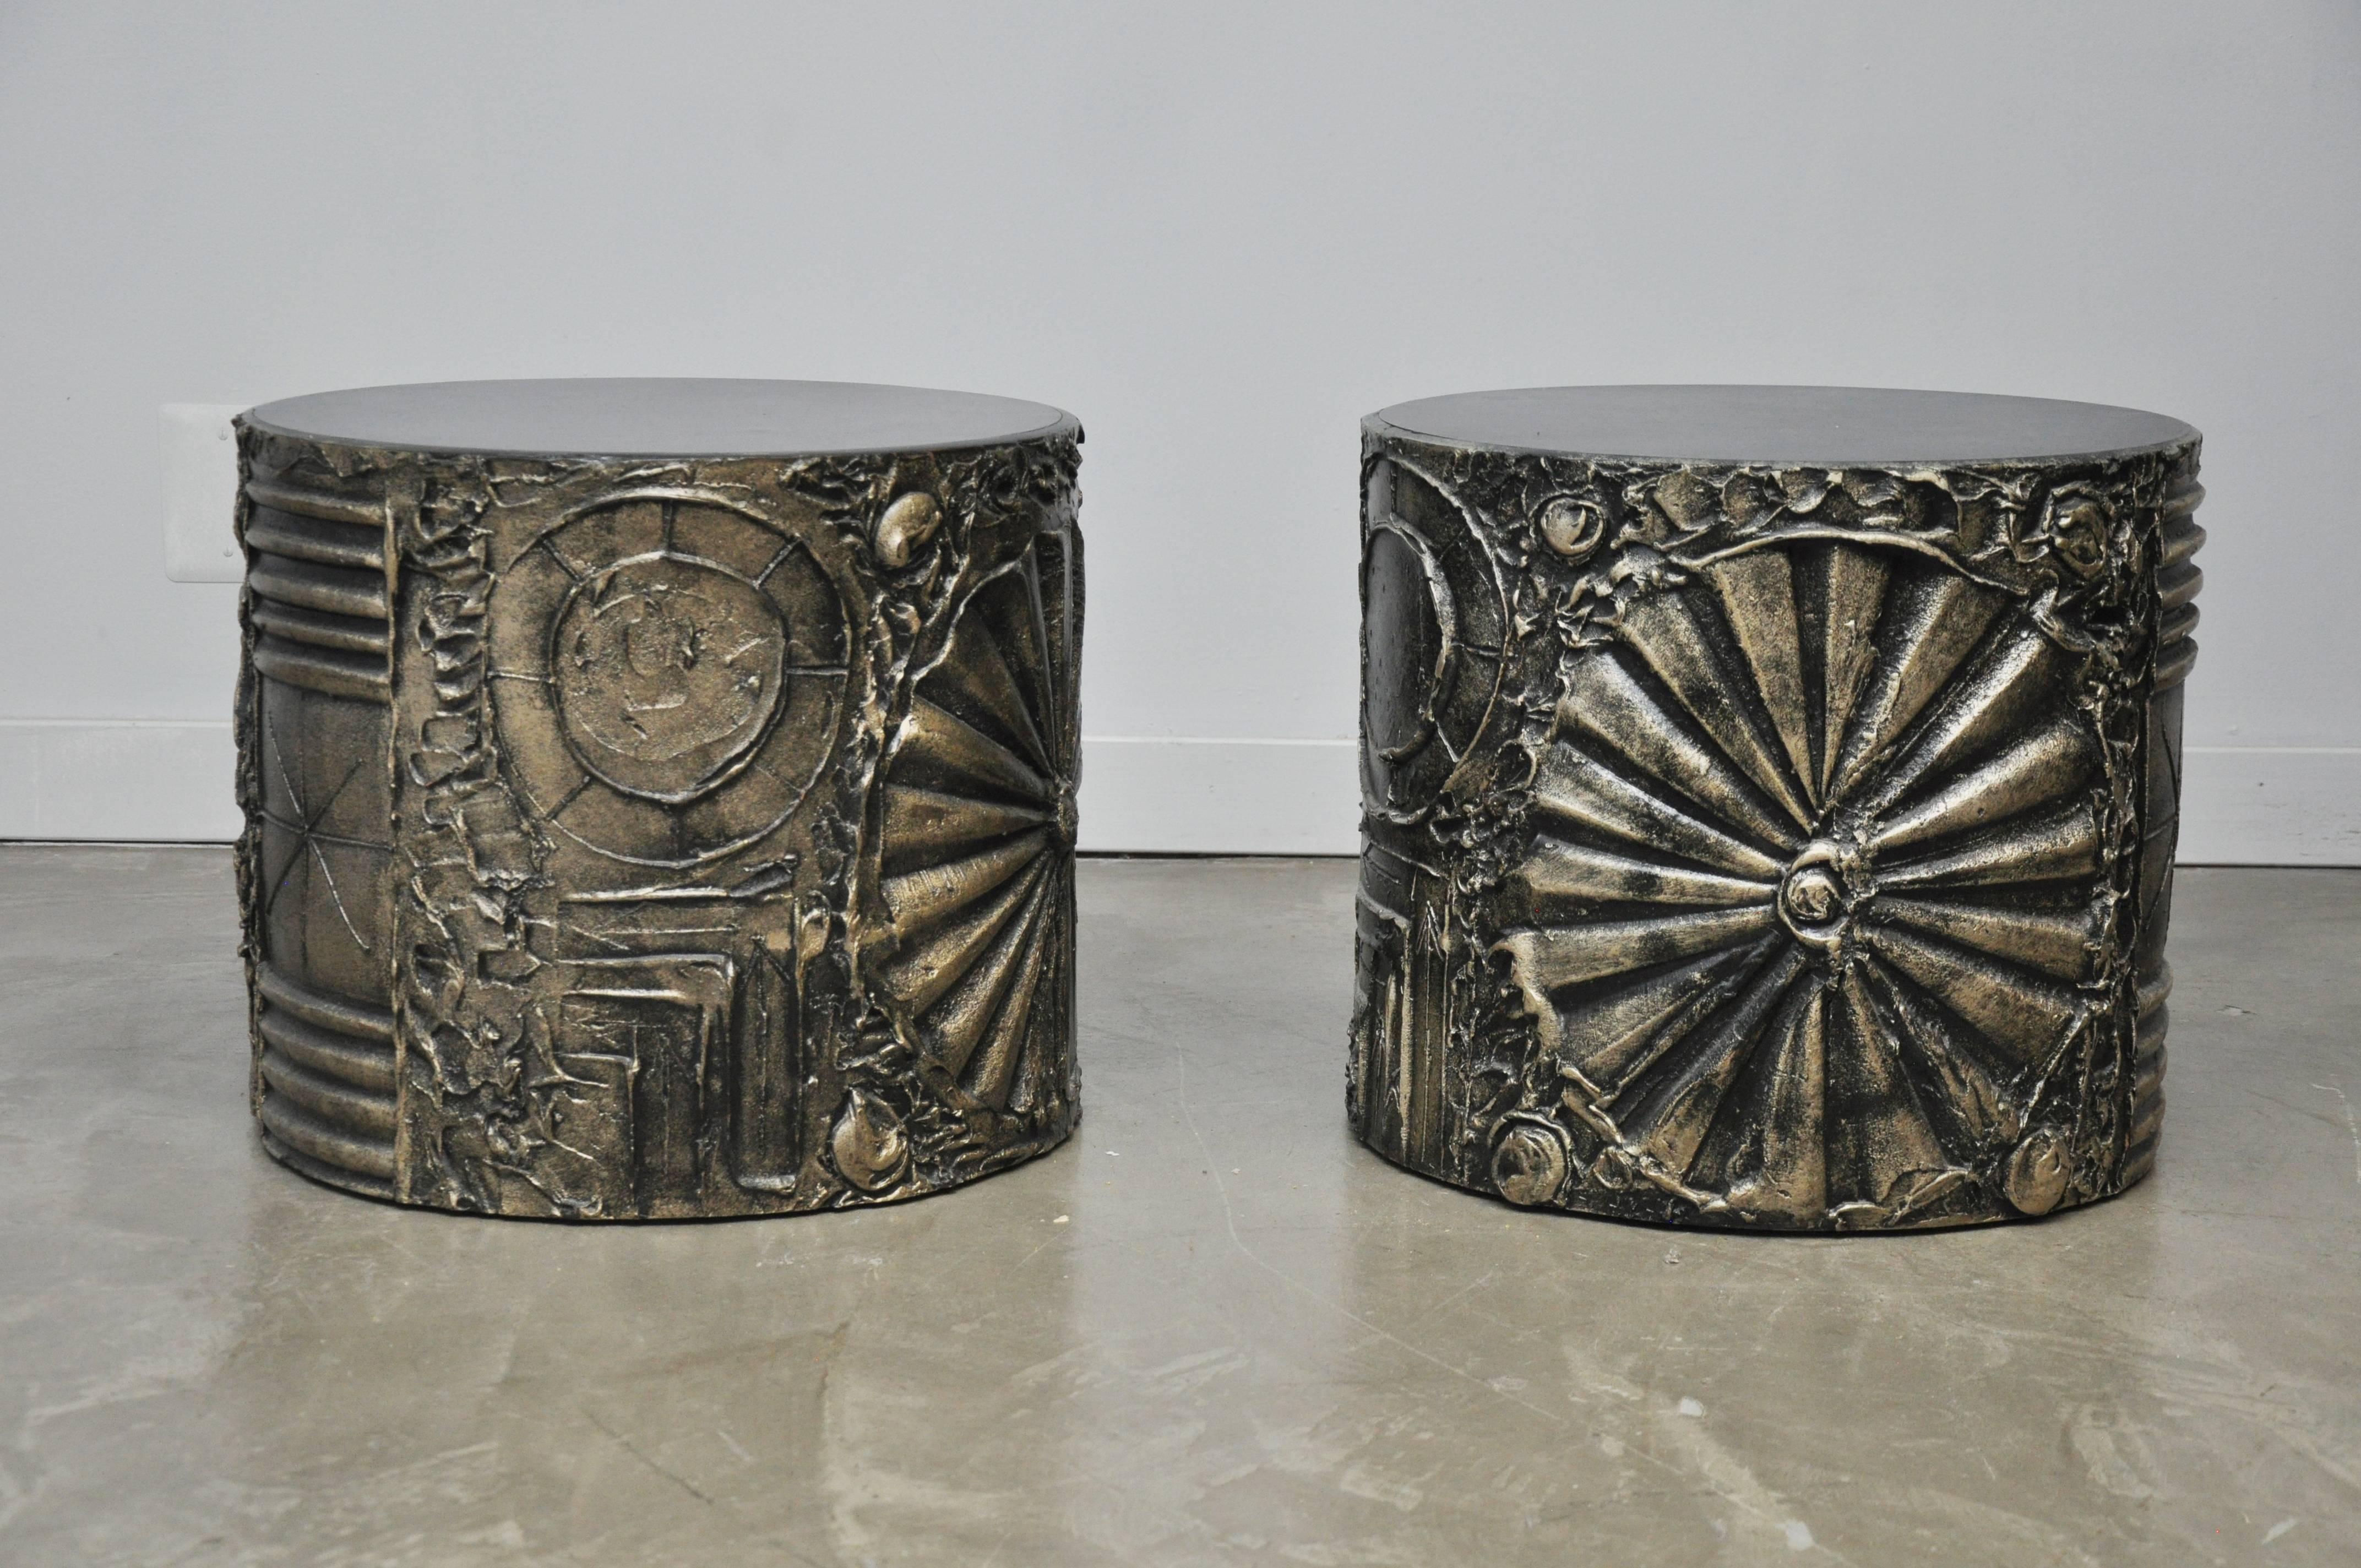 Pair of Brutalist drum end tables by Adrian Pearsall.